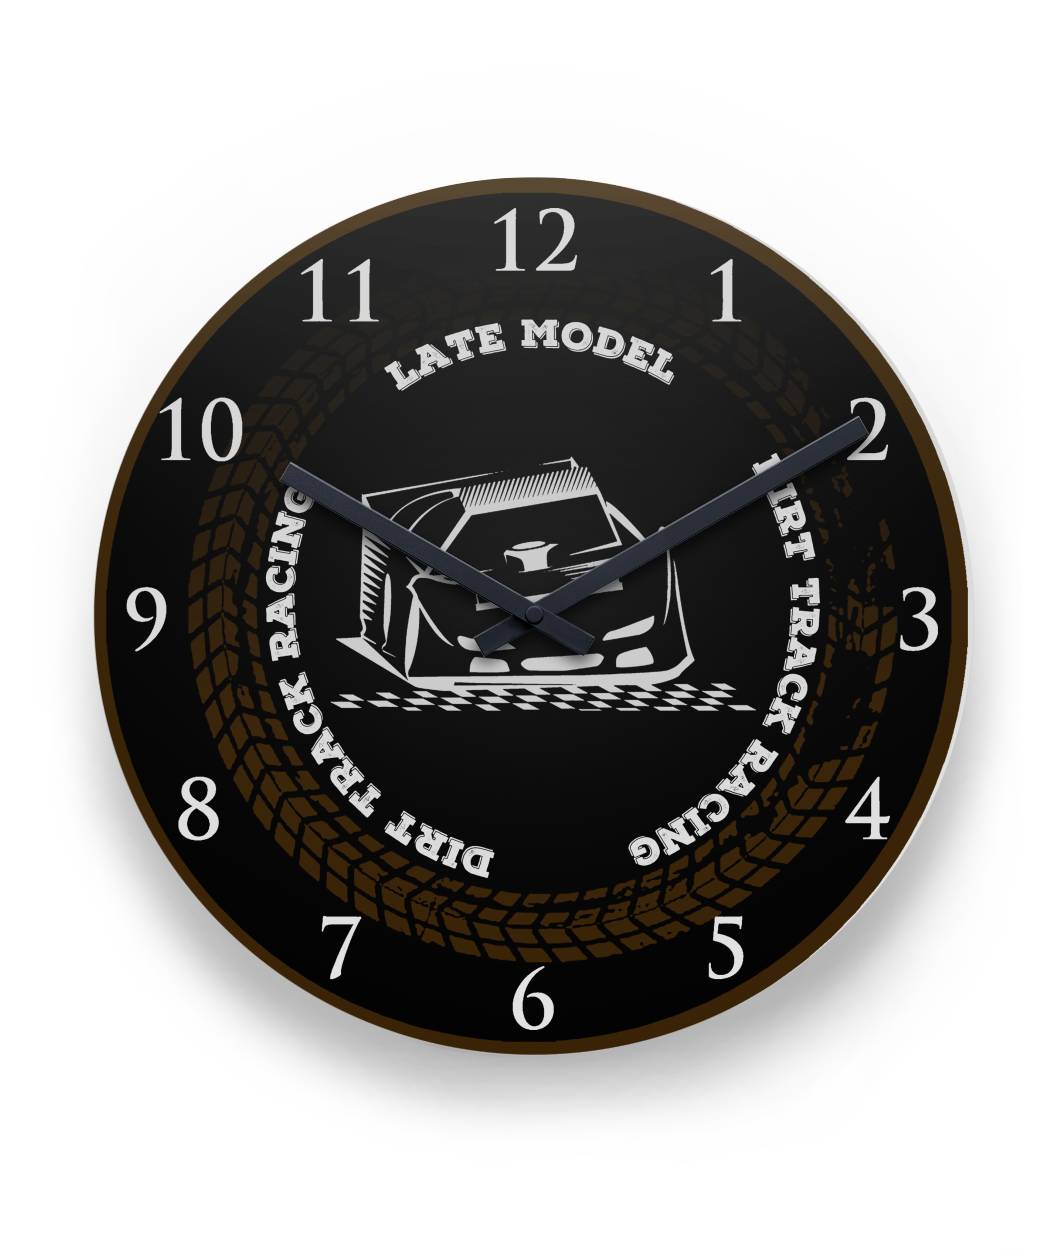 Late Model Round Wall Clock